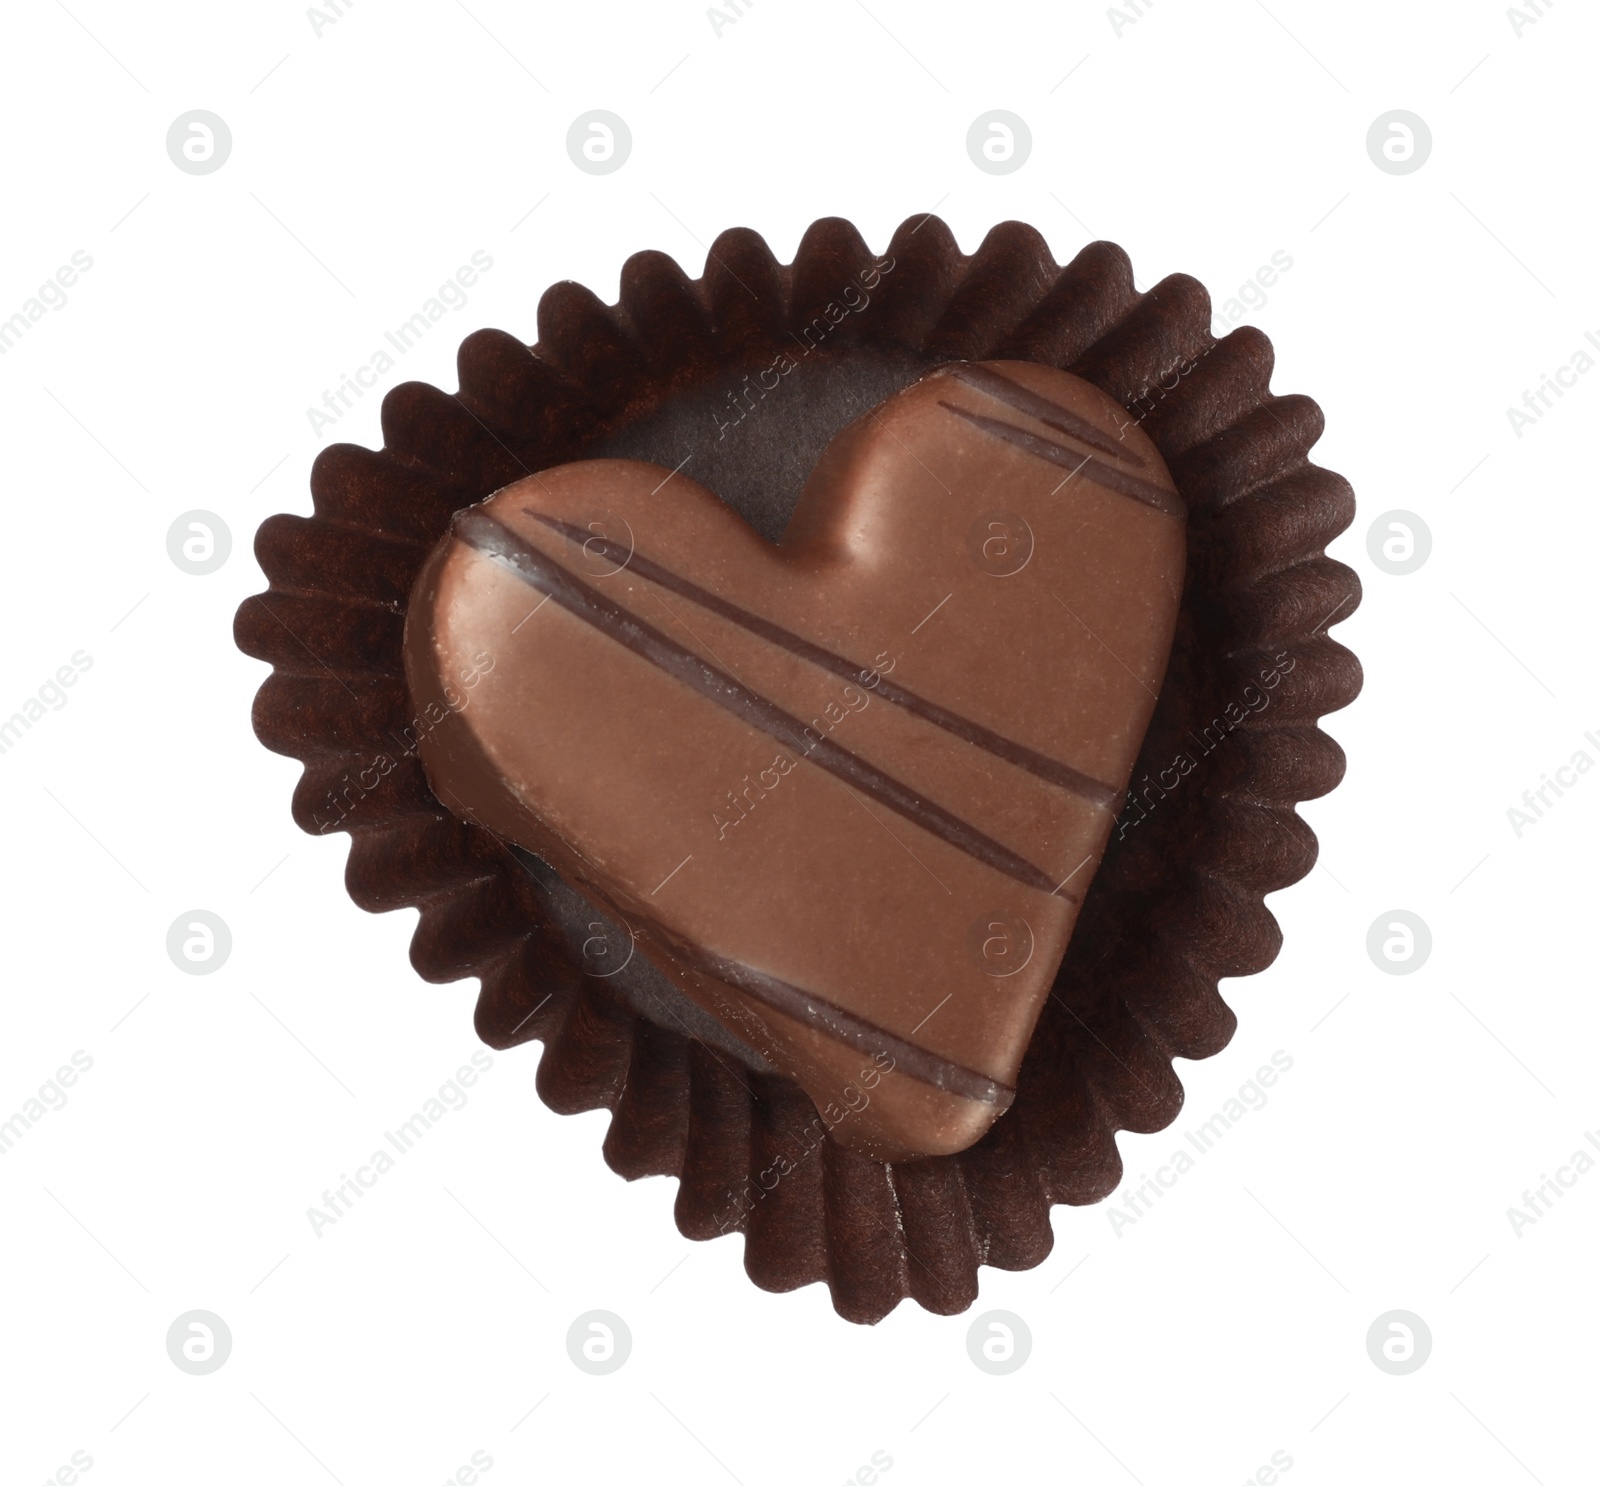 Photo of Beautiful heart shaped chocolate candy isolated on white, top view